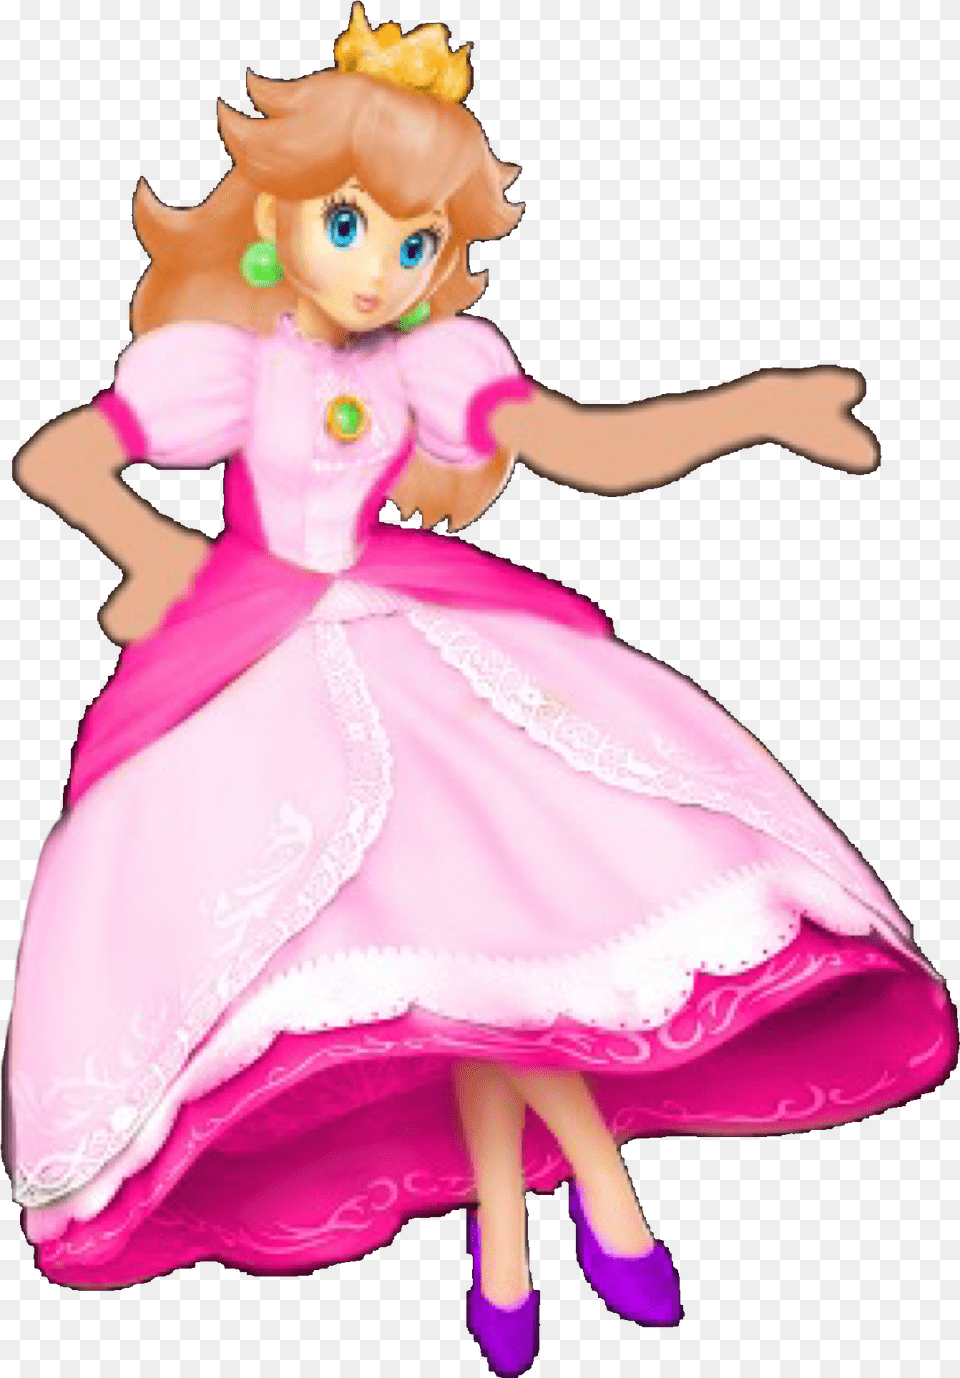 Princess Toadstool Dic Cartoons Peach Smash Bros Transparent Background, Doll, Toy, Baby, Person Png Image